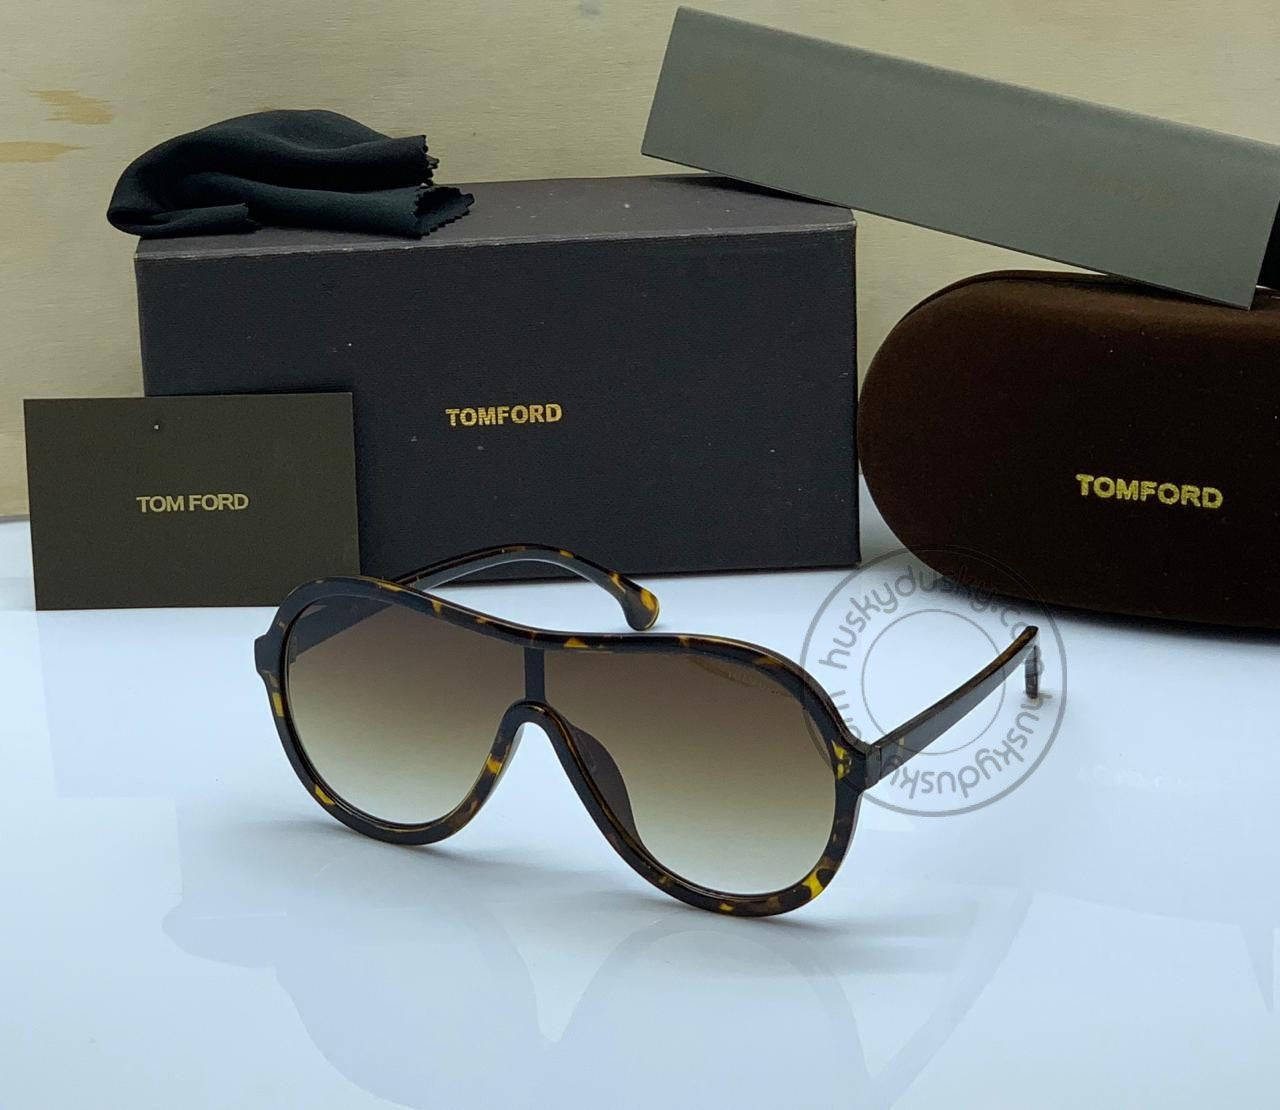 Tom Ford Latest Design Brown Color Round Sunglass Men's Women's For Man Woman or Girl TF-305 Black Frame Sunglass